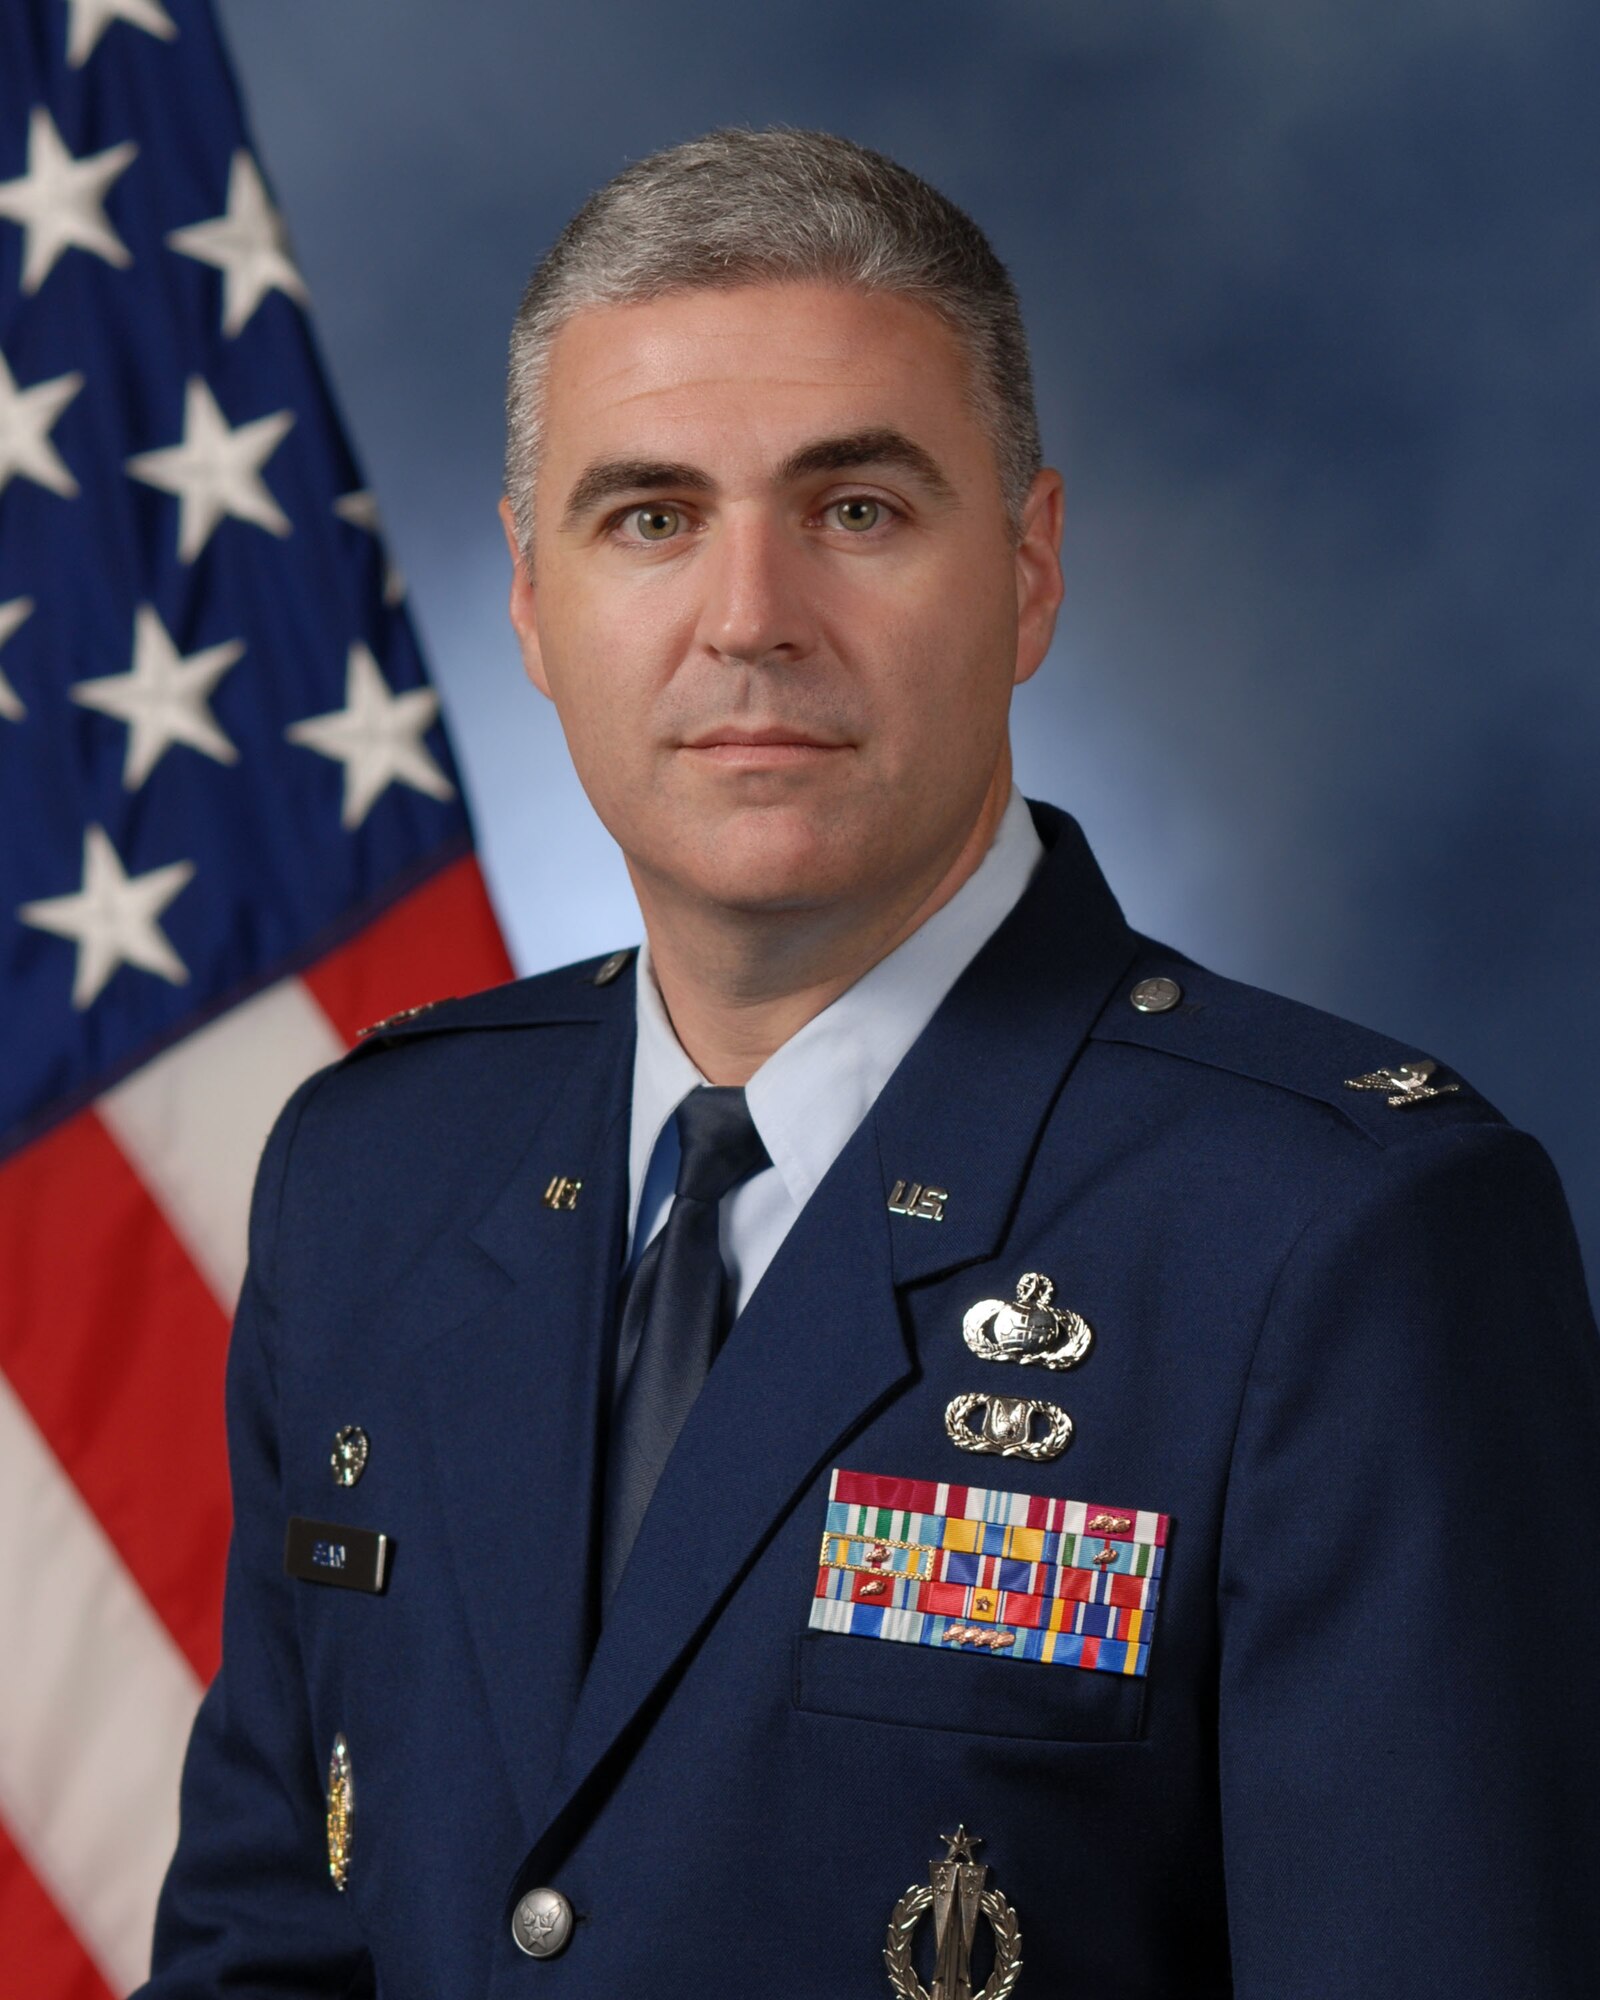 Col. Thomas W. Geary, 17th Training Wing commander, Goodfellow AFB, Texas.  Goodfellow is an Air Education and Training Command base.  The mission of the 17th Training Wing is to "Train World-Class Firefighting and Intelligence, Surveillance, and Reconnaissance Warriors."